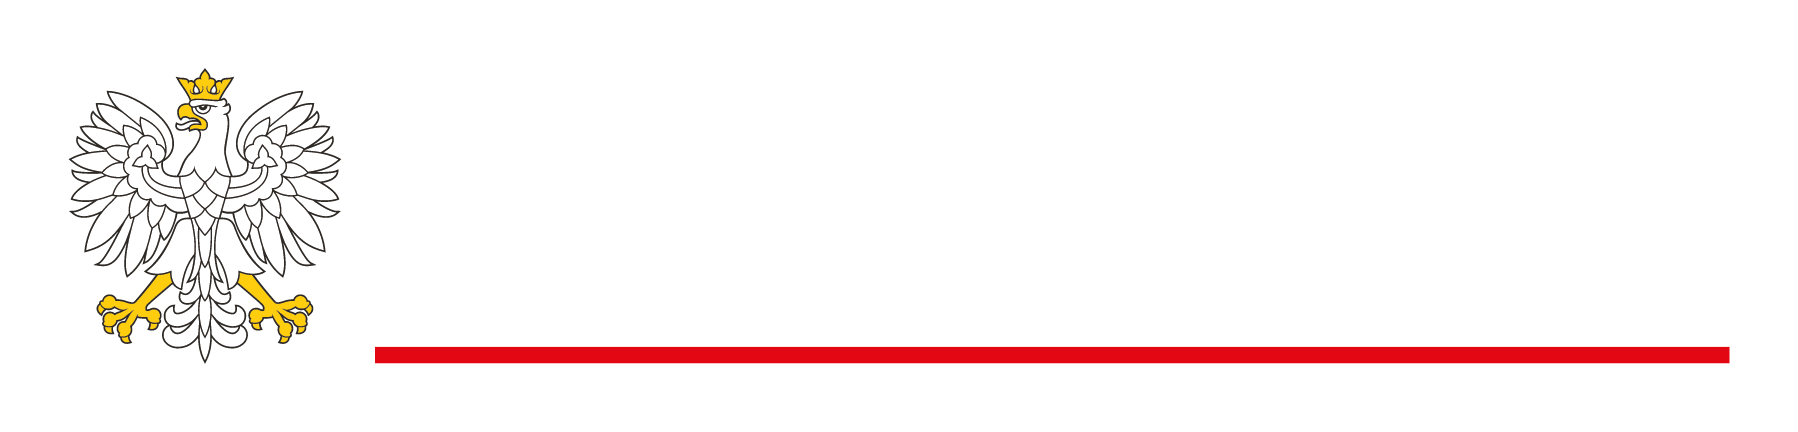 Poland_Ministry_of_Education_and_Science